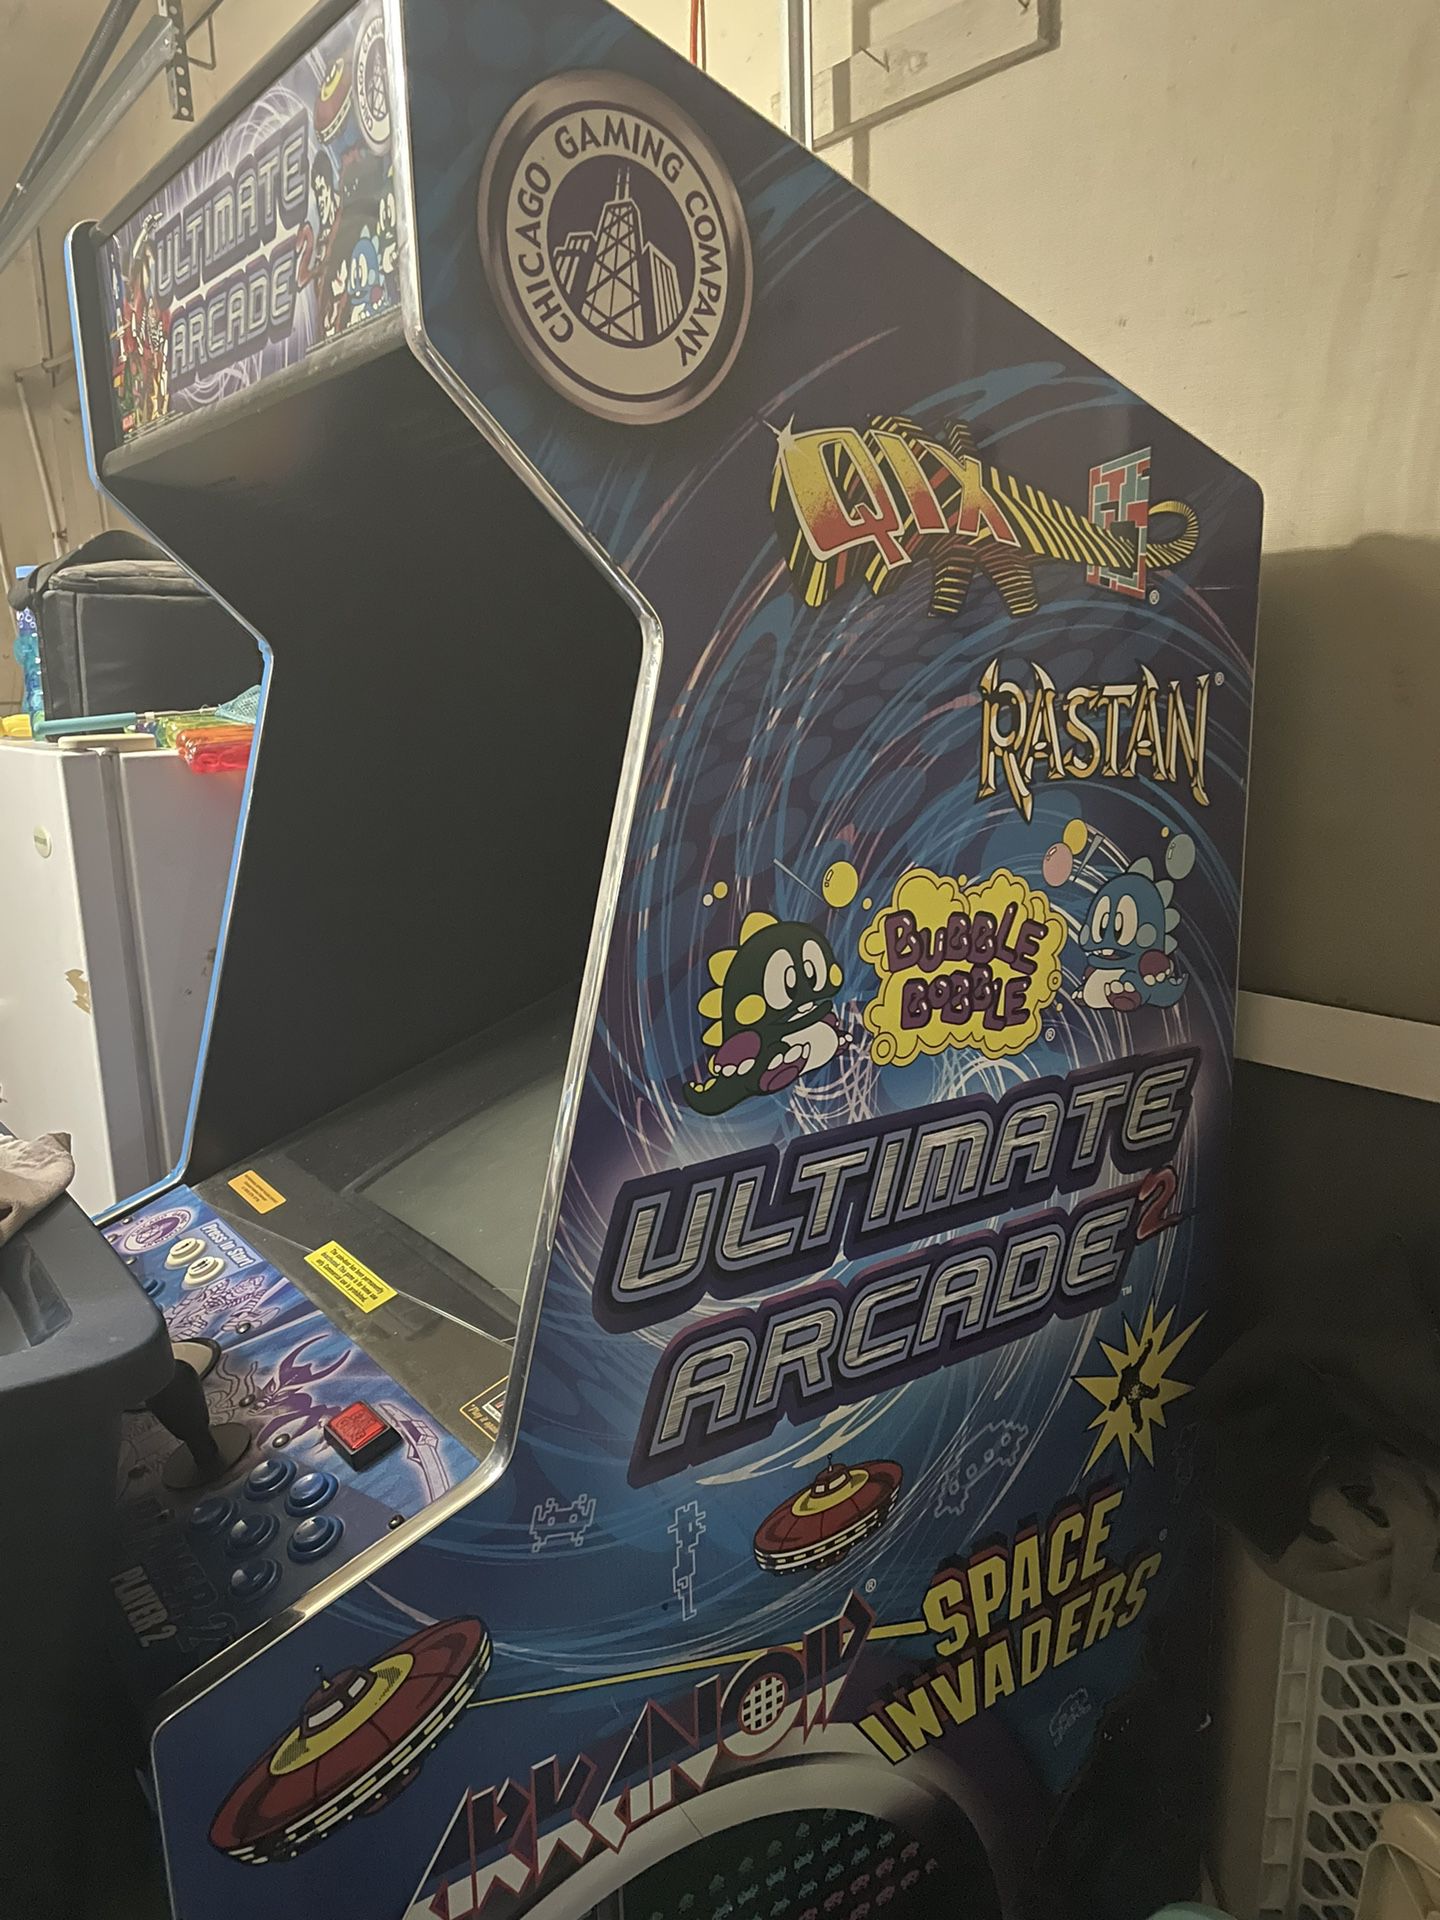 Chicago gaming company ultimate arcade game